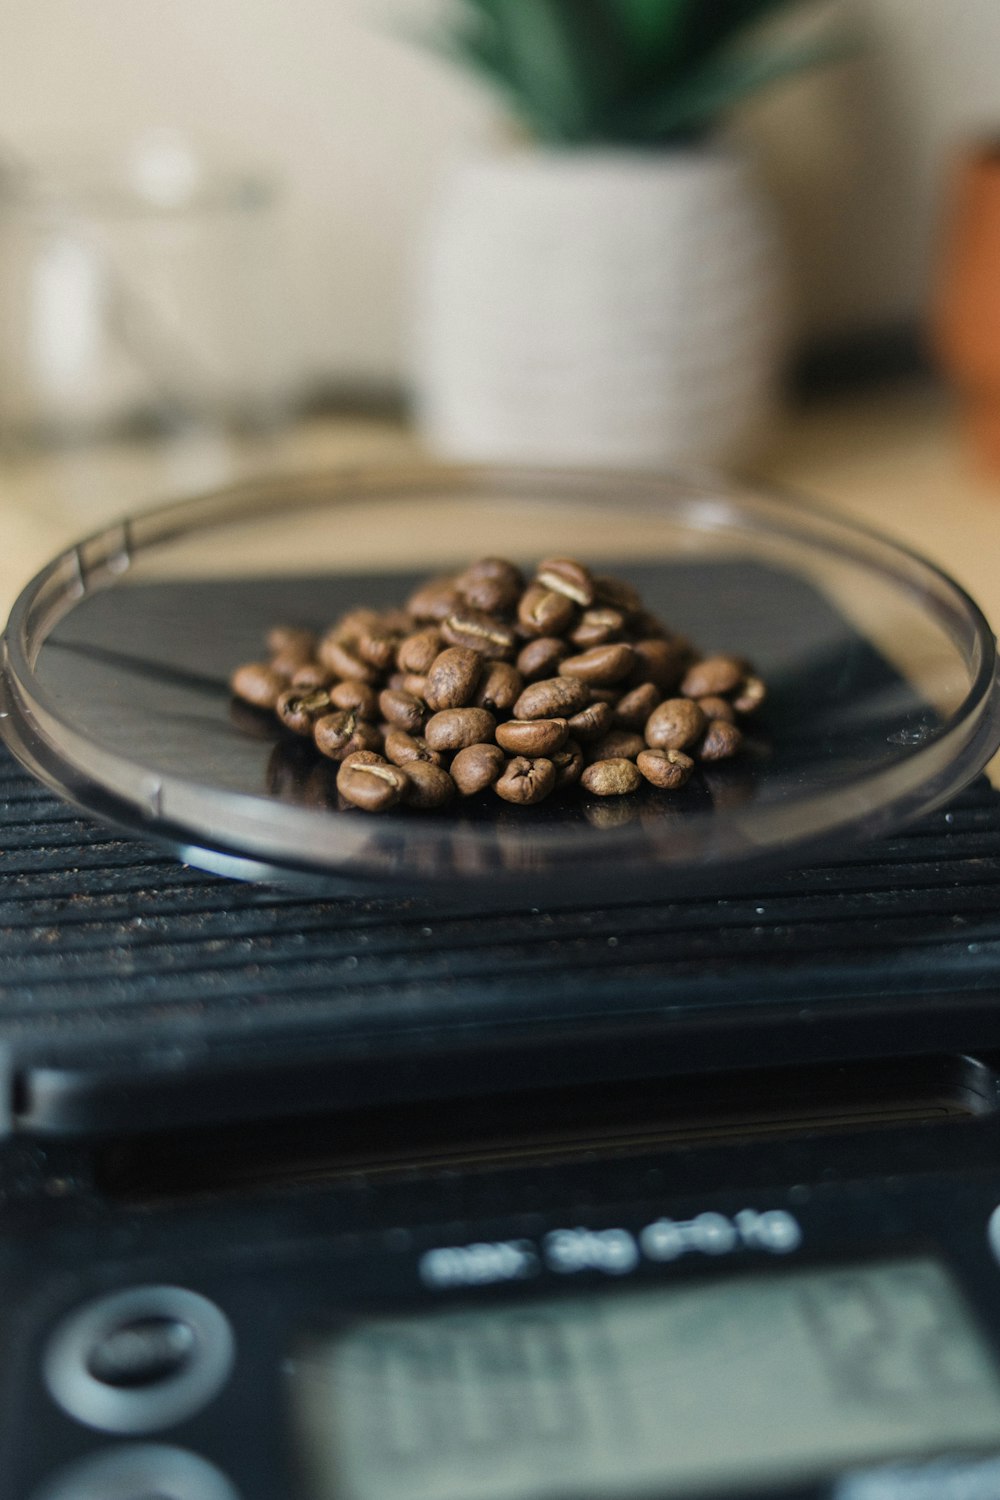 a bowl of coffee beans